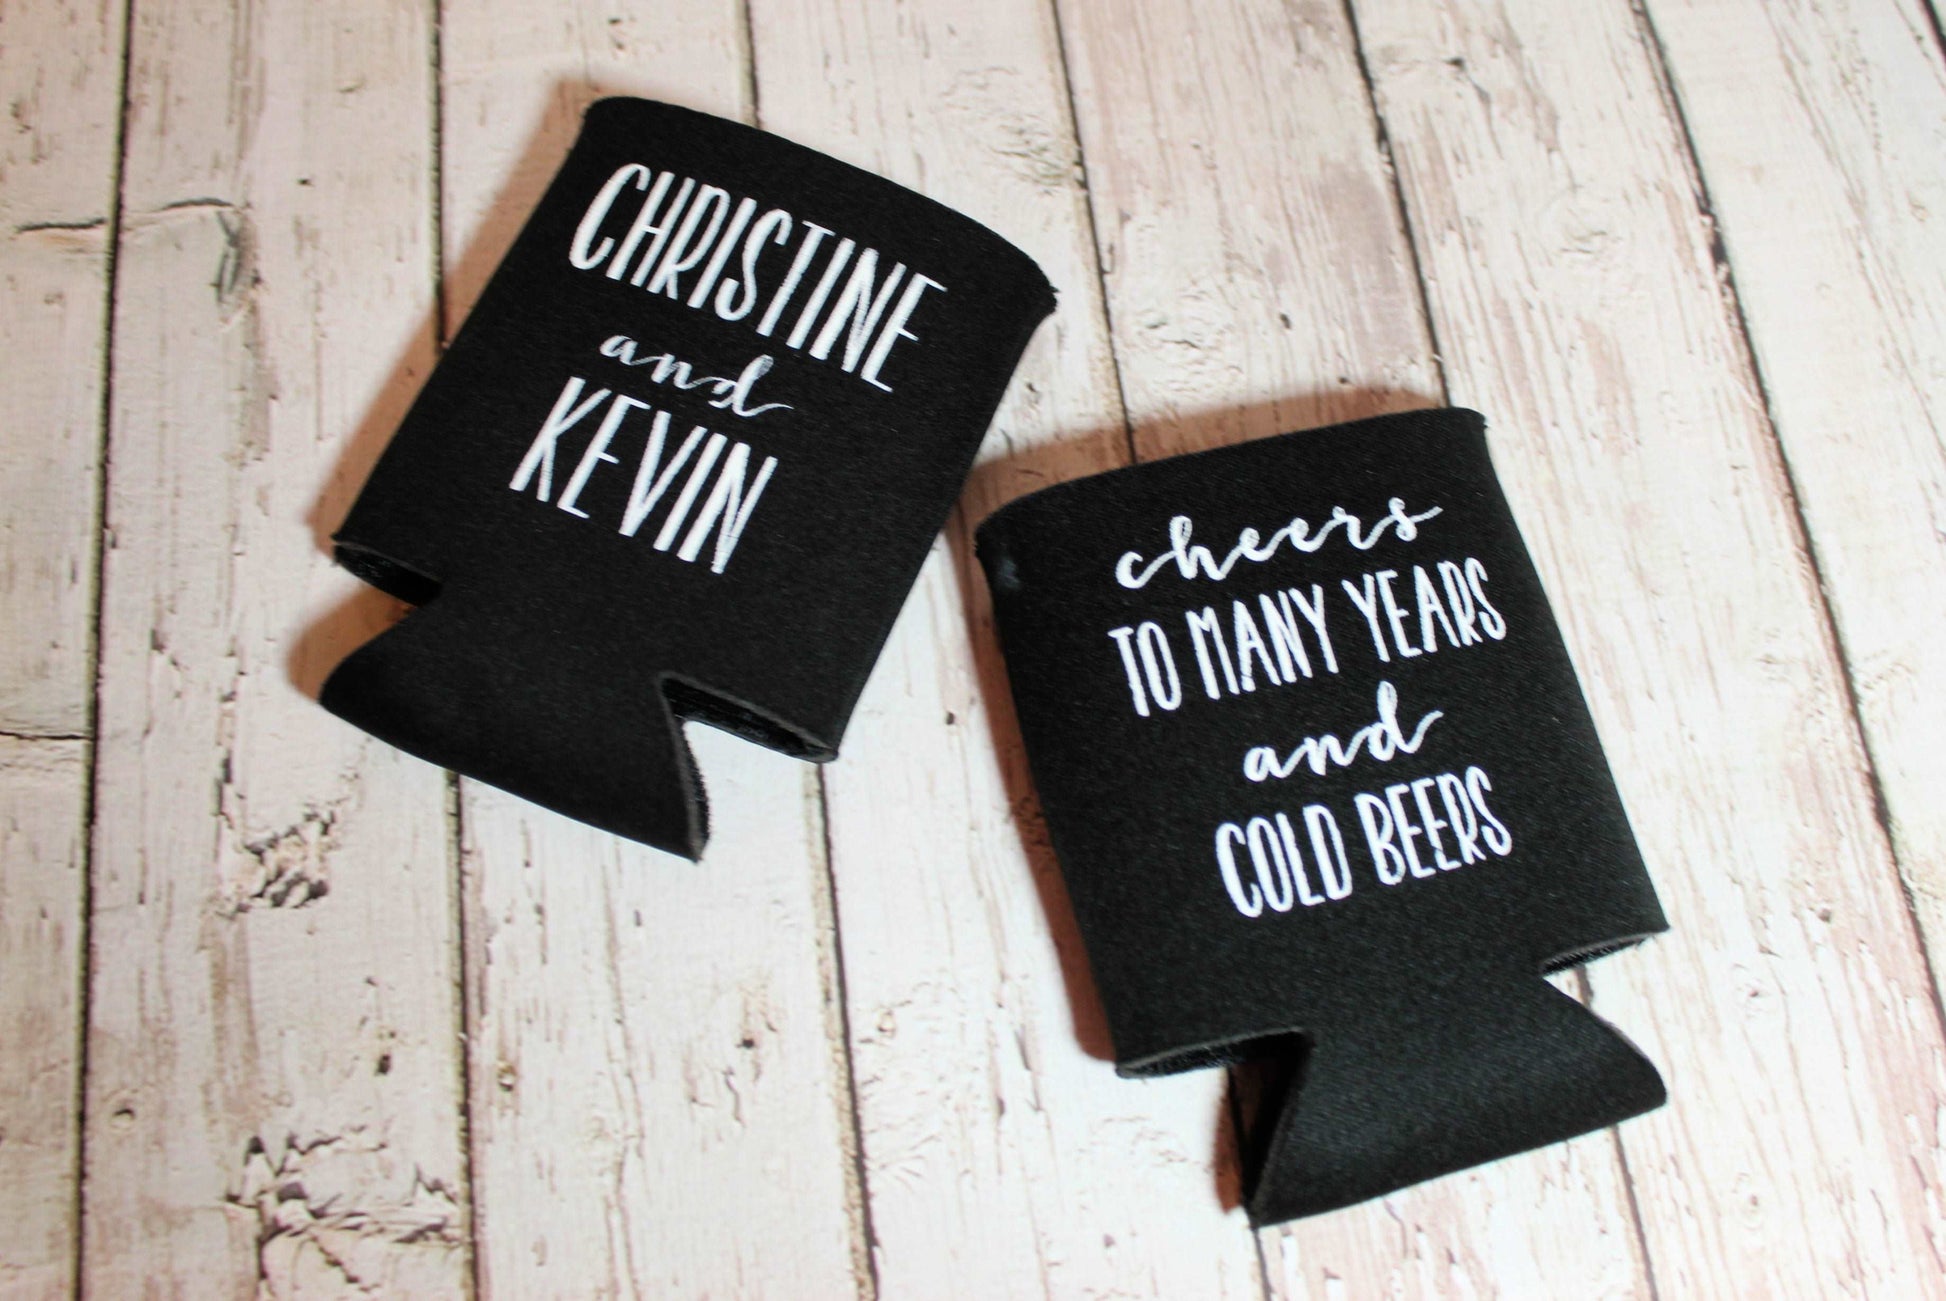 Cheers to Many Years & Cold Beers Screen printed Can Cooler freeshipping - Be Vocal Designs